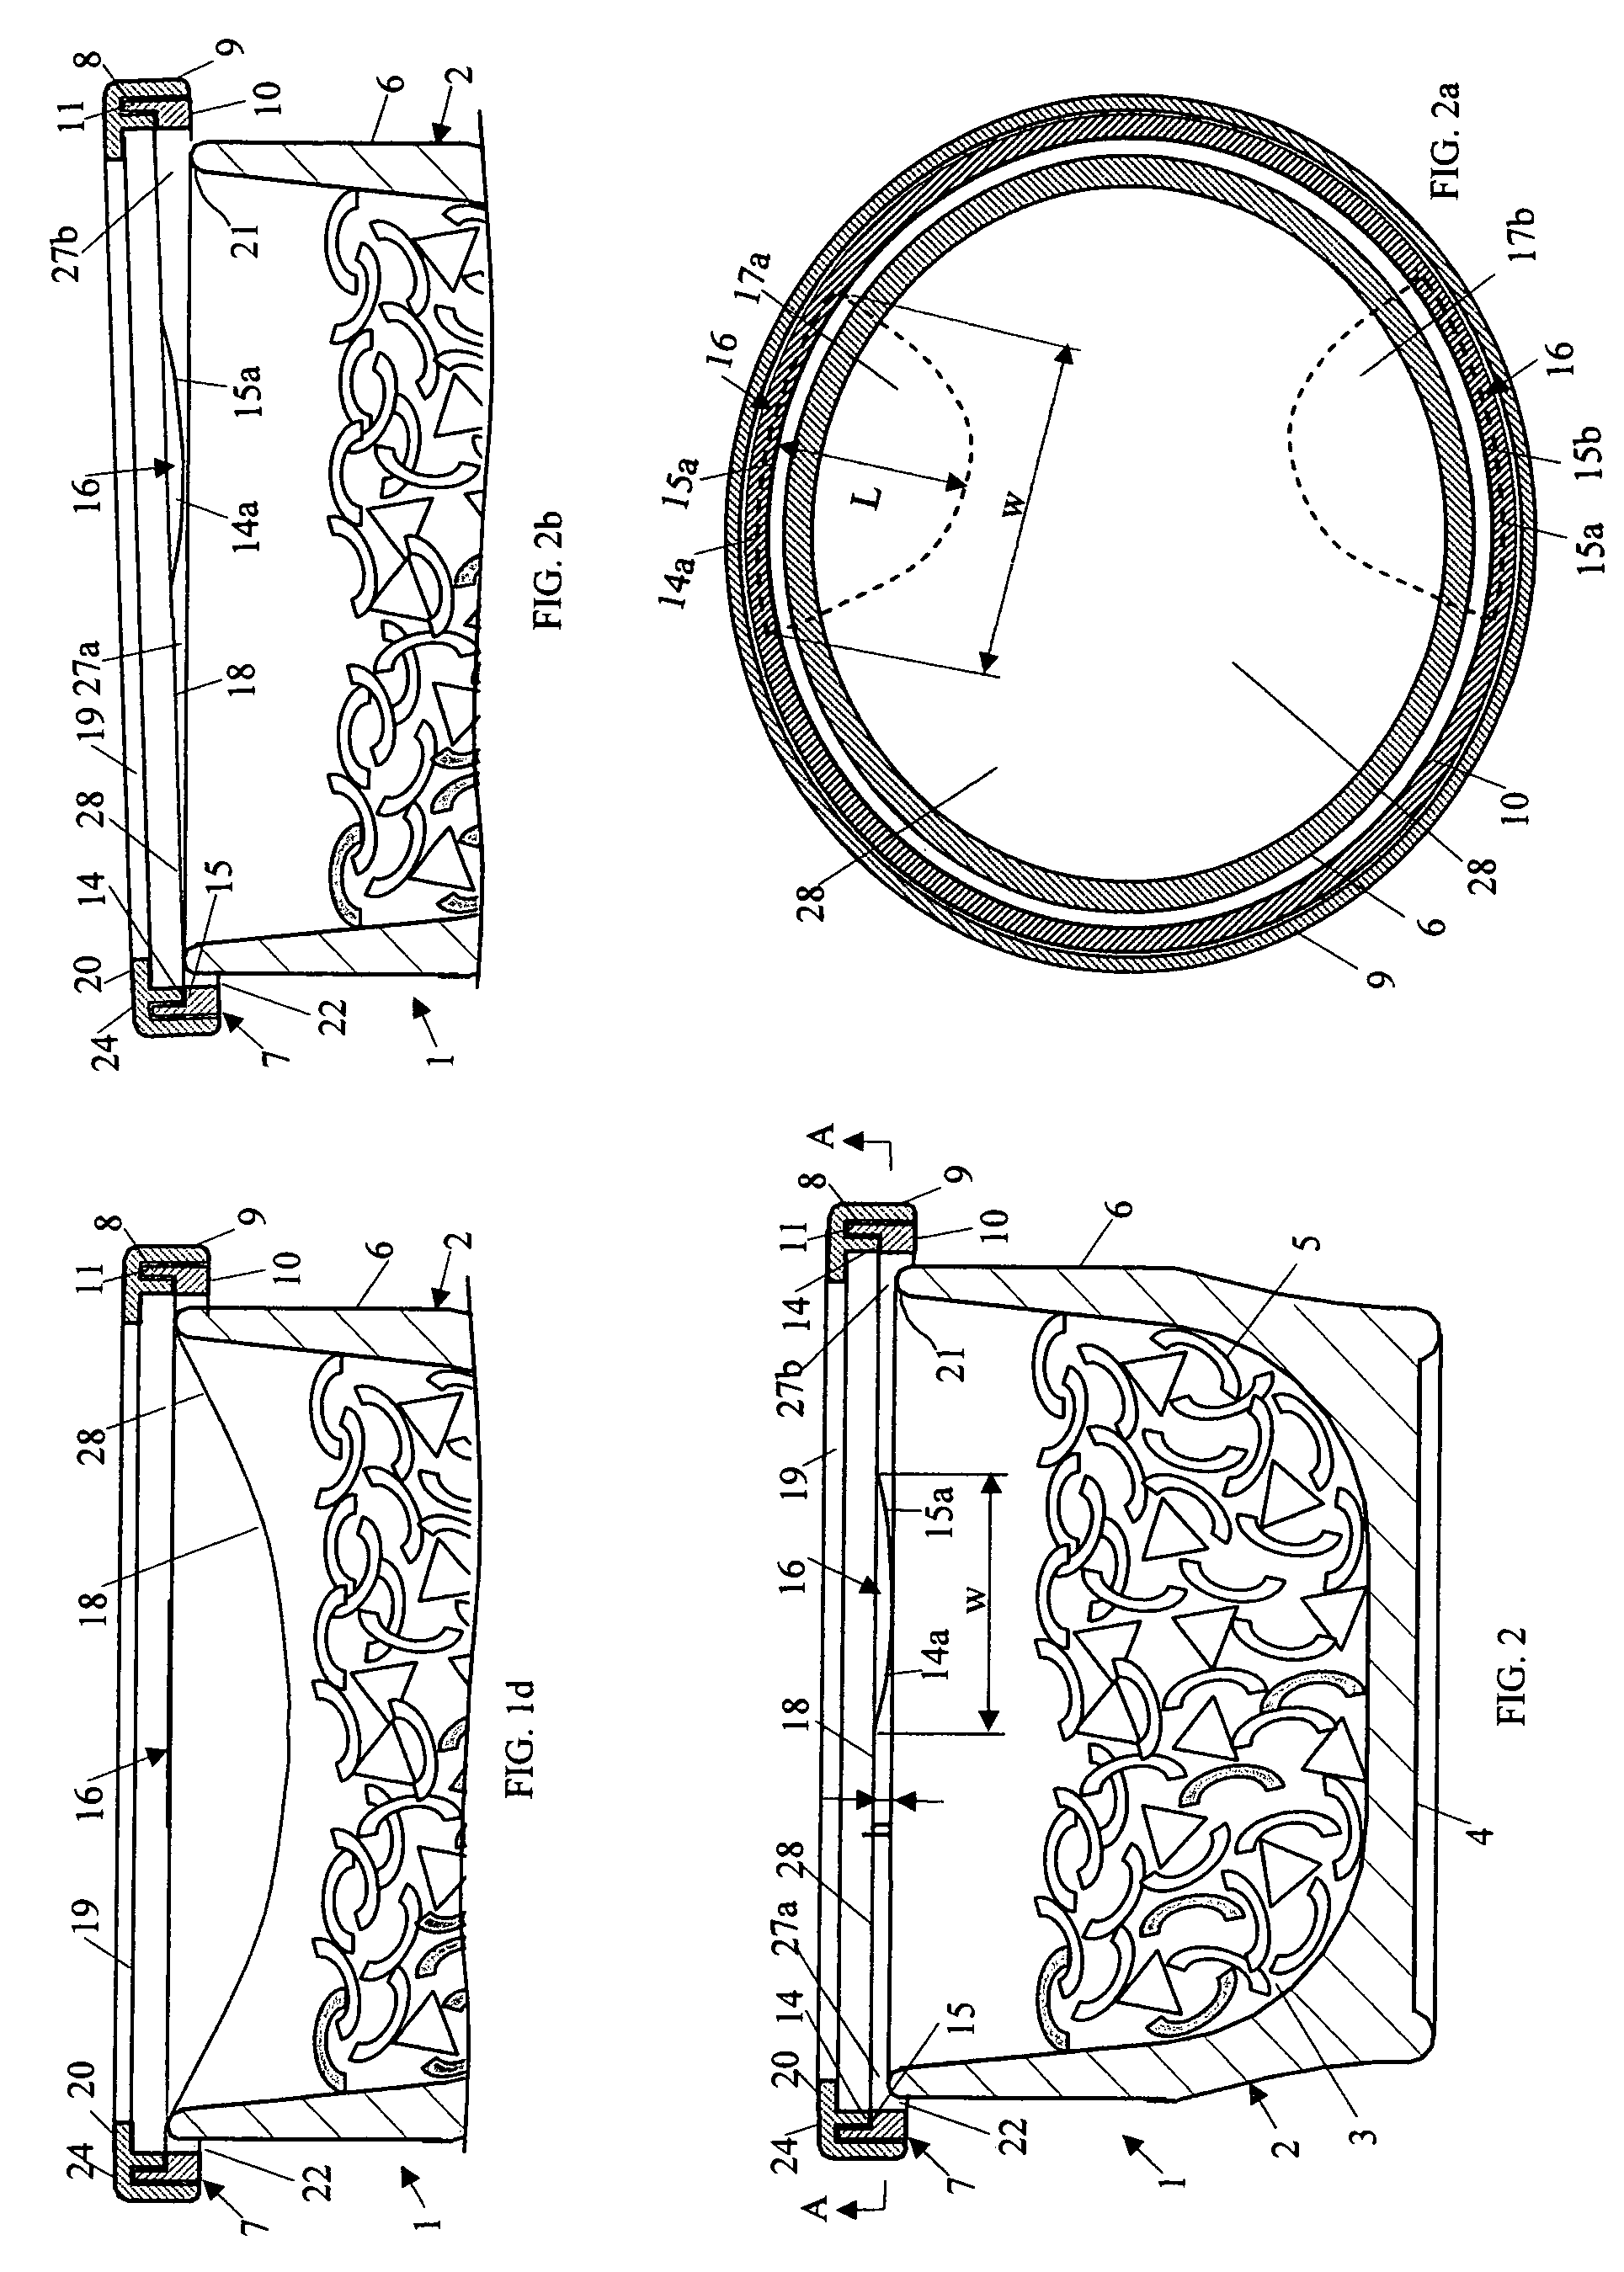 Vacuum generating device for sealing perishable products and method of use